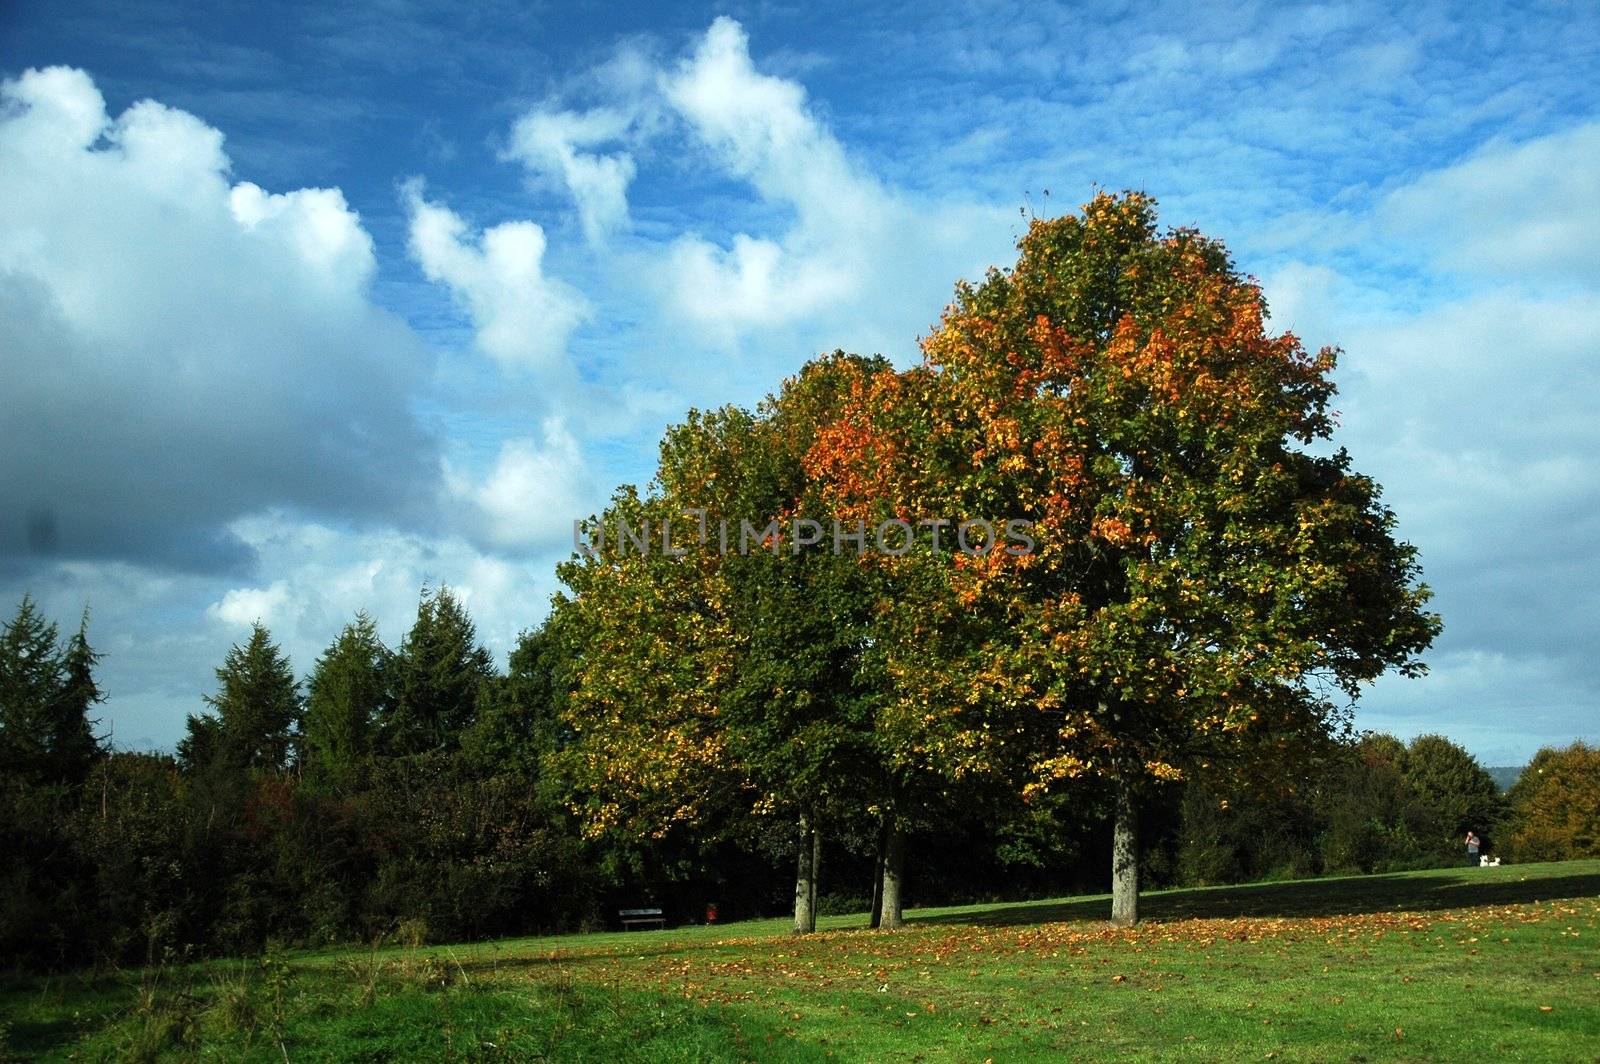 Autumn Fairwater park with blue sky, white clouds